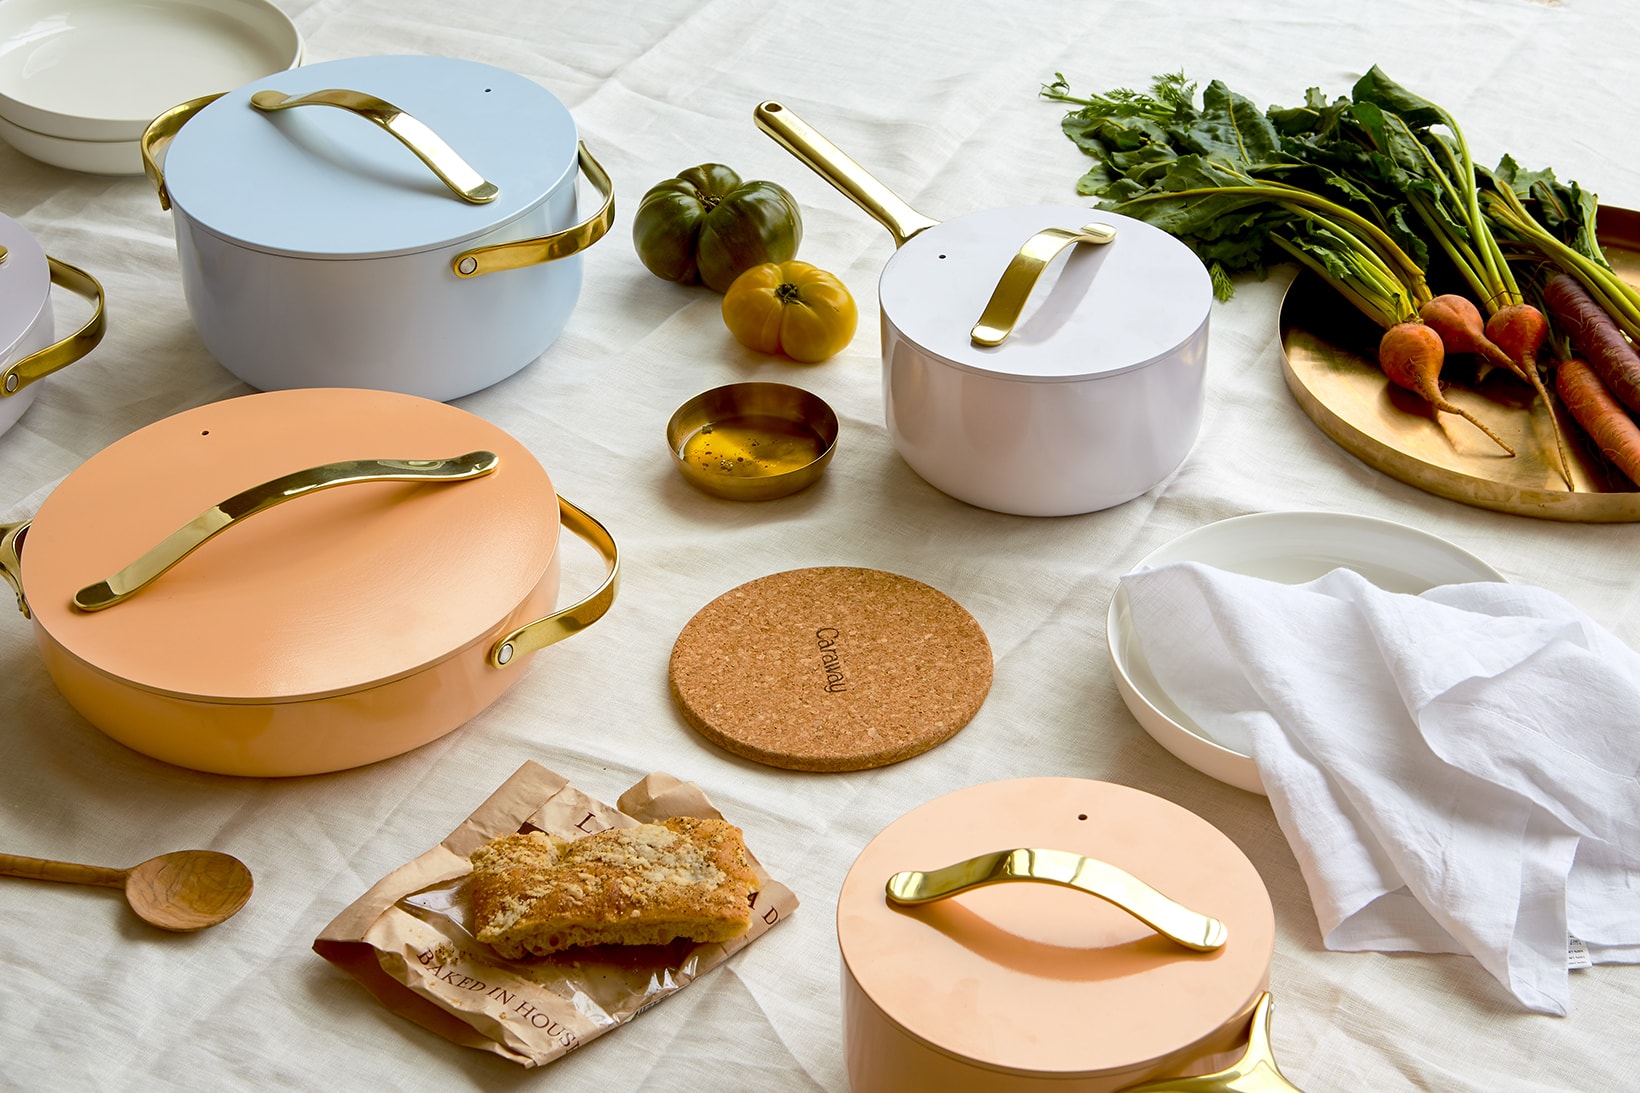 https://image-cdn.hypb.st/https%3A%2F%2Fhypebeast.com%2Fwp-content%2Fblogs.dir%2F6%2Ffiles%2F2021%2F06%2Fcaraway-full-bloom-kitchen-cookware-pastel-collection-fry-sauce-saute-pan-dutch-oven-set-price-where-to-buy-3.jpg?cbr=1&q=90